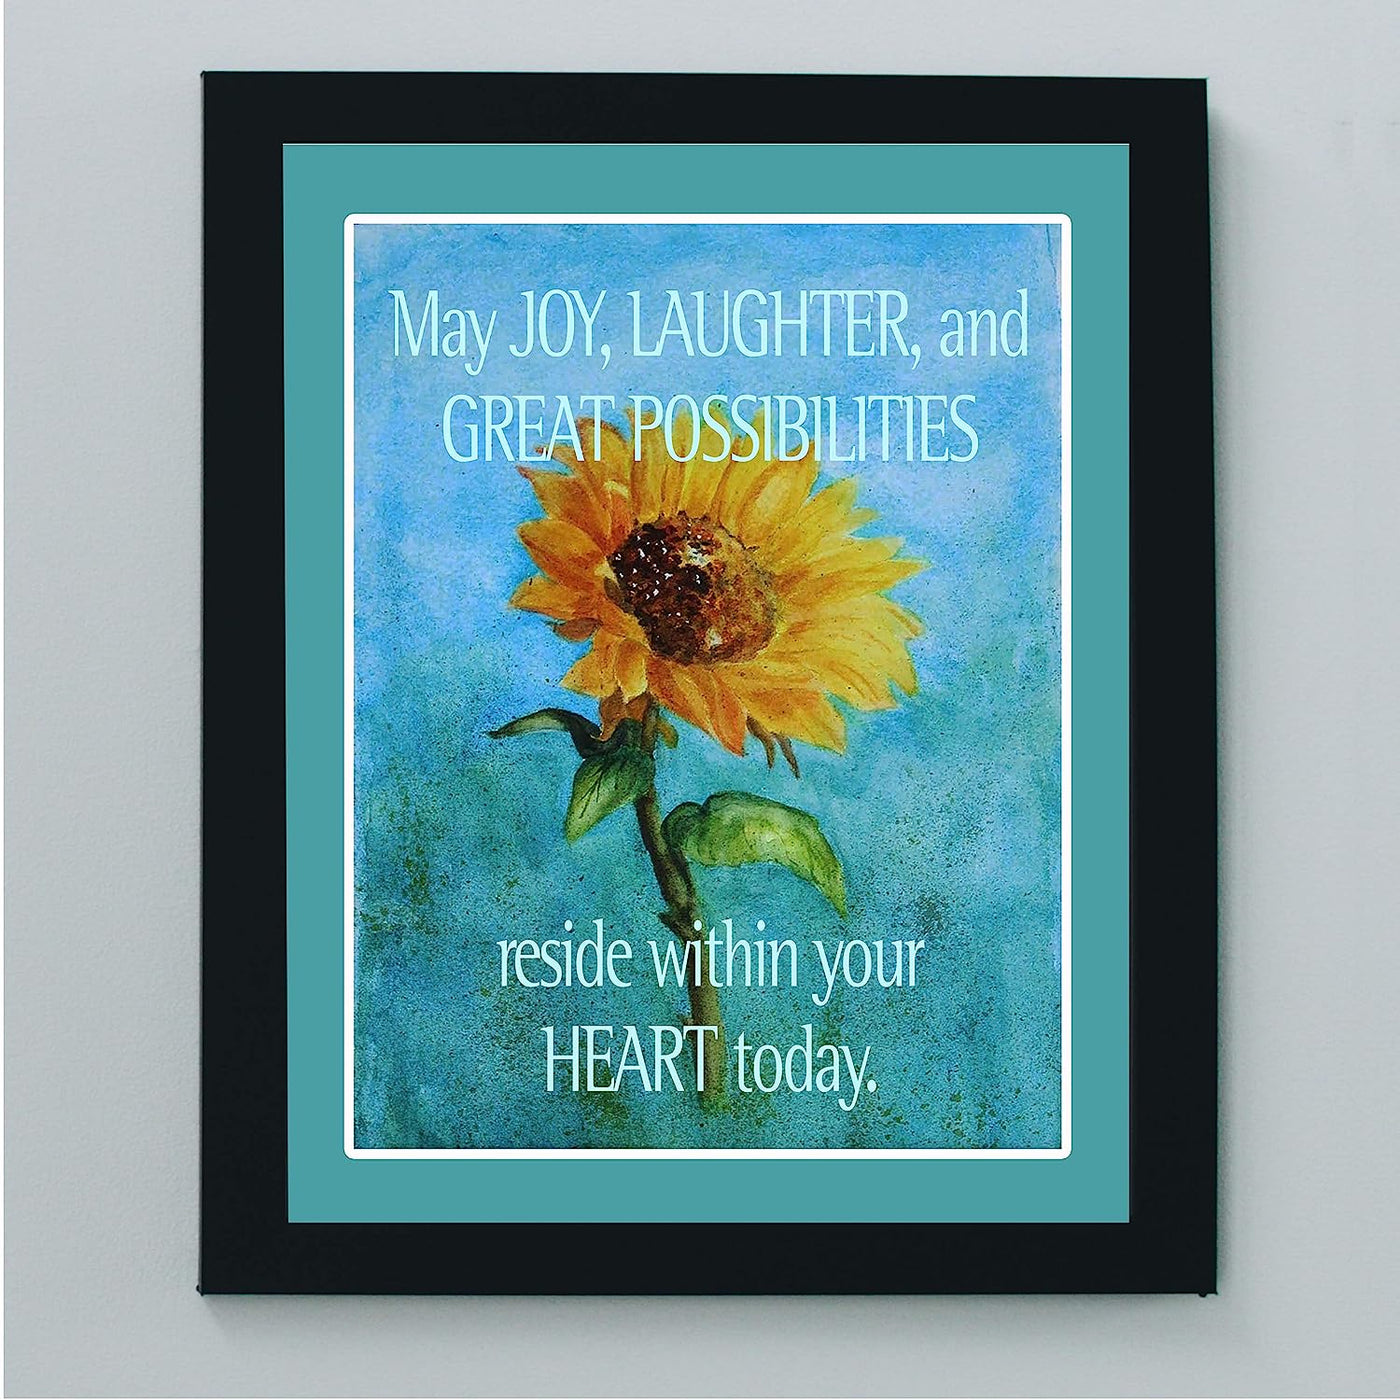 May Joy-Laughter Reside Within Your Heart Inspirational Quotes Wall Art -8 x 10" Modern Floral Poster Print-Ready to Frame. Positive Home-Office-Church-Christian Decor. Great Motivational Gift!